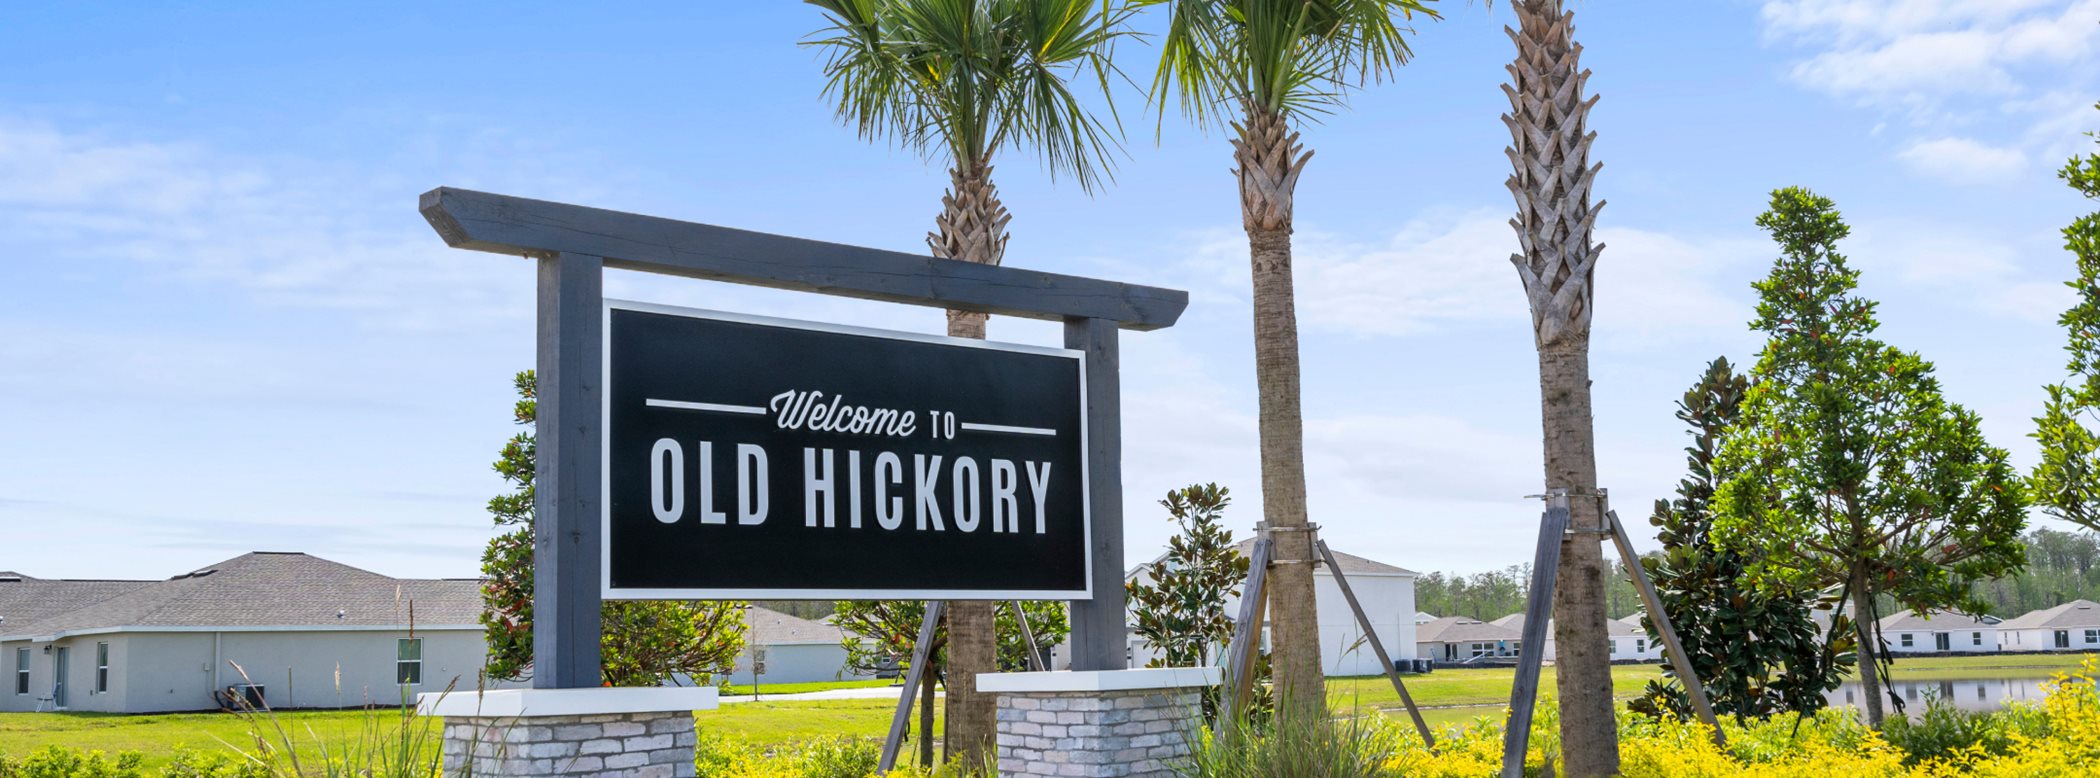 Old Hickory monument sign